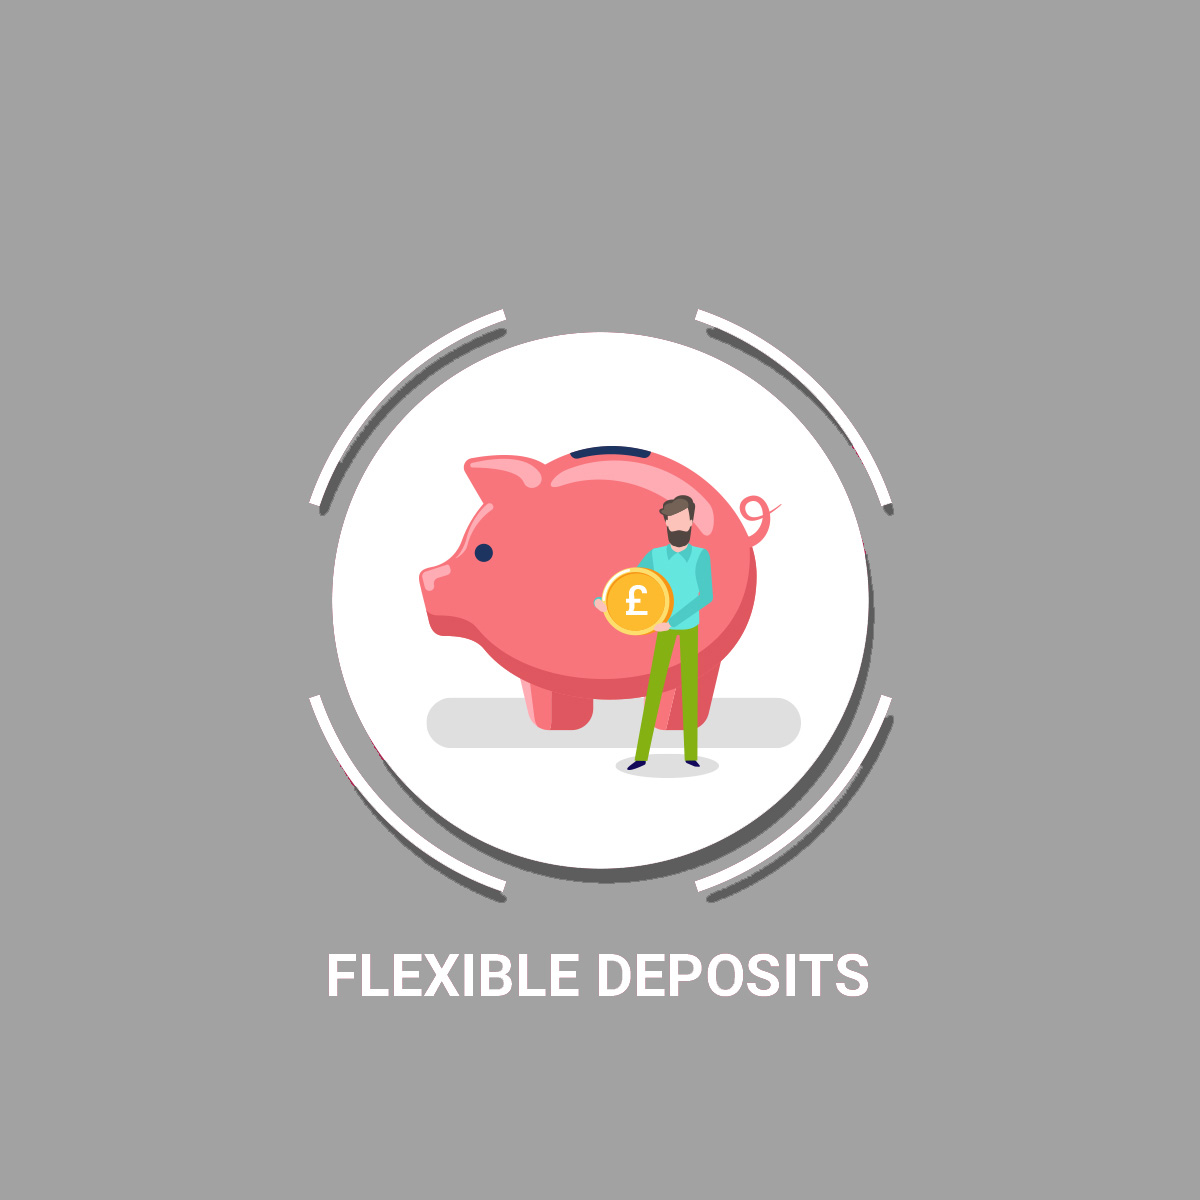 Flexible Pay Weekly Deposit Icon From Only £10 weekly